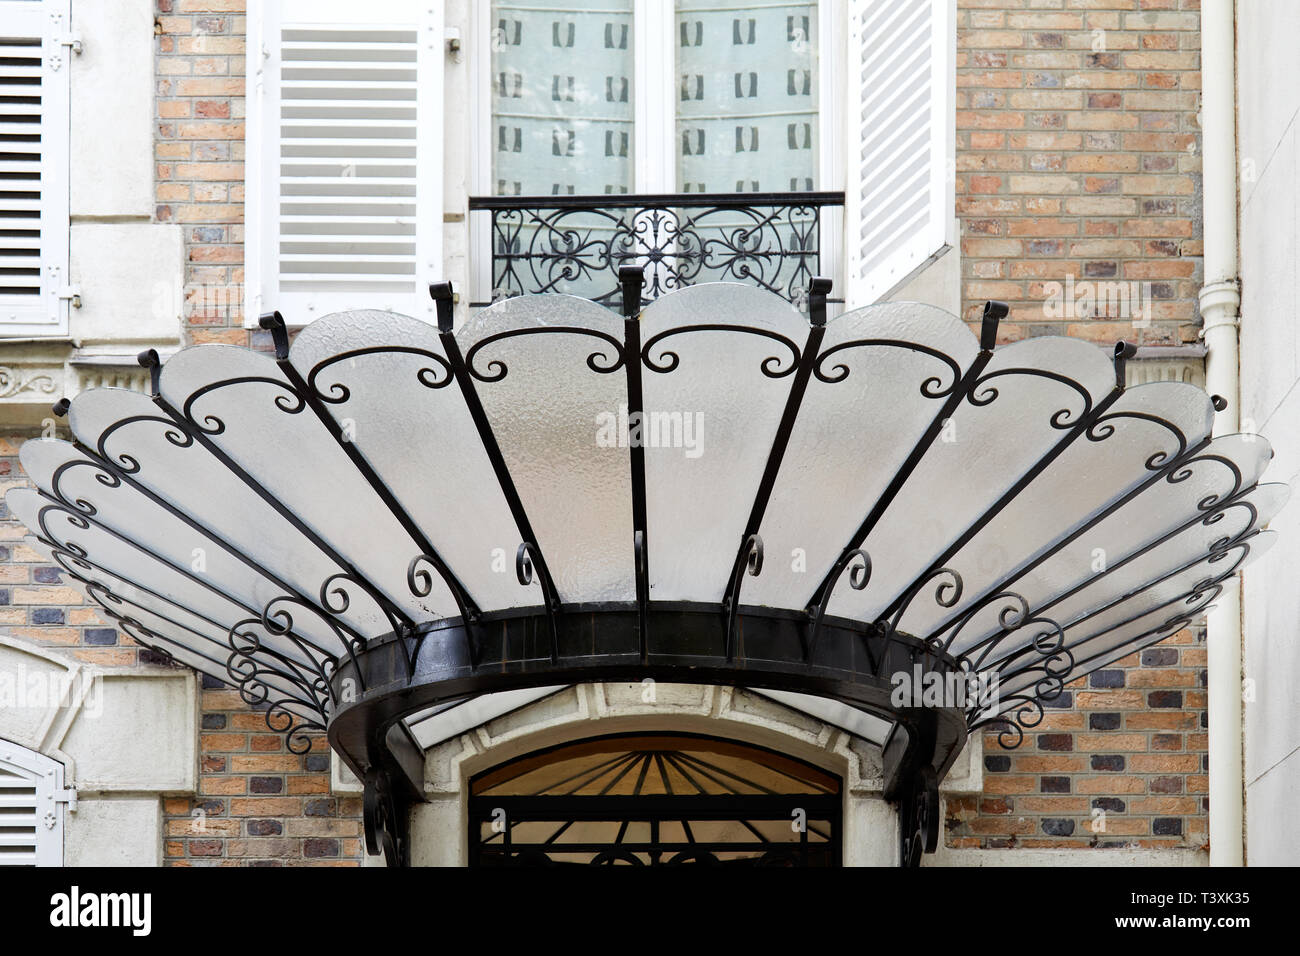 PARIS, FRANCE - JULY 23, 2017: Art Nouveau canopy in glass and black wrought iron in Paris, France Stock Photo